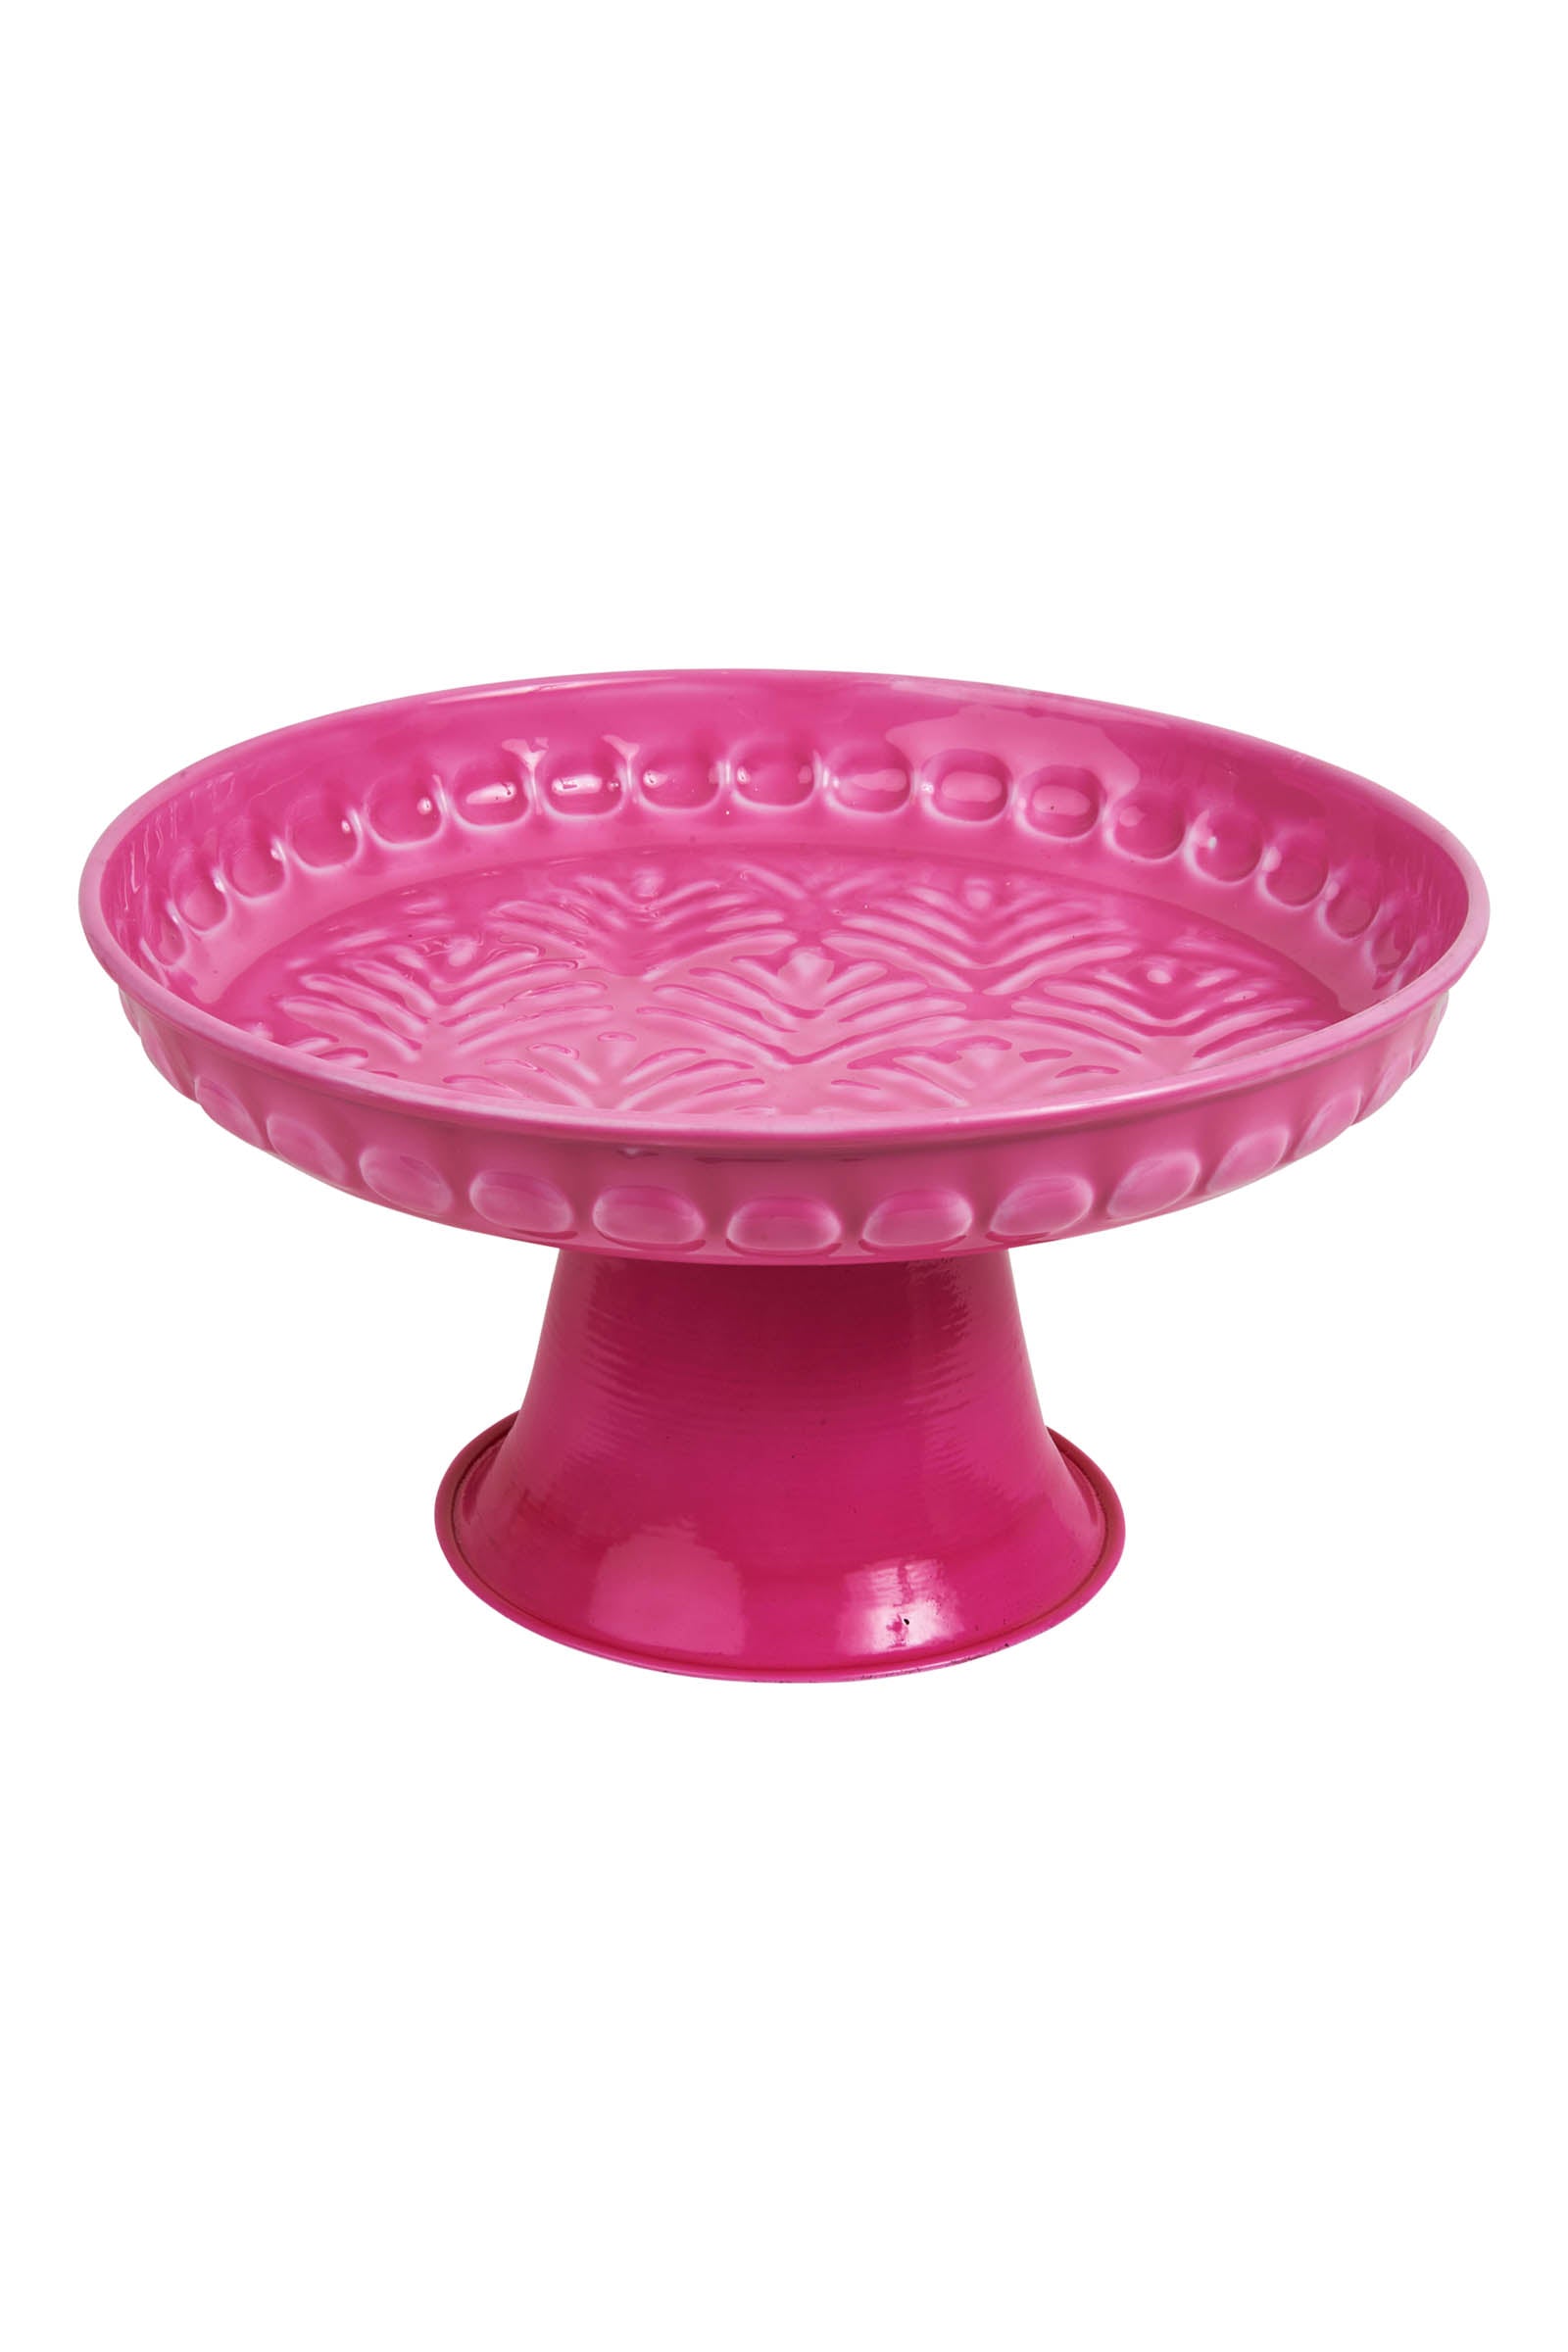 La Vie Plate - Candy - eb&ive Table Top